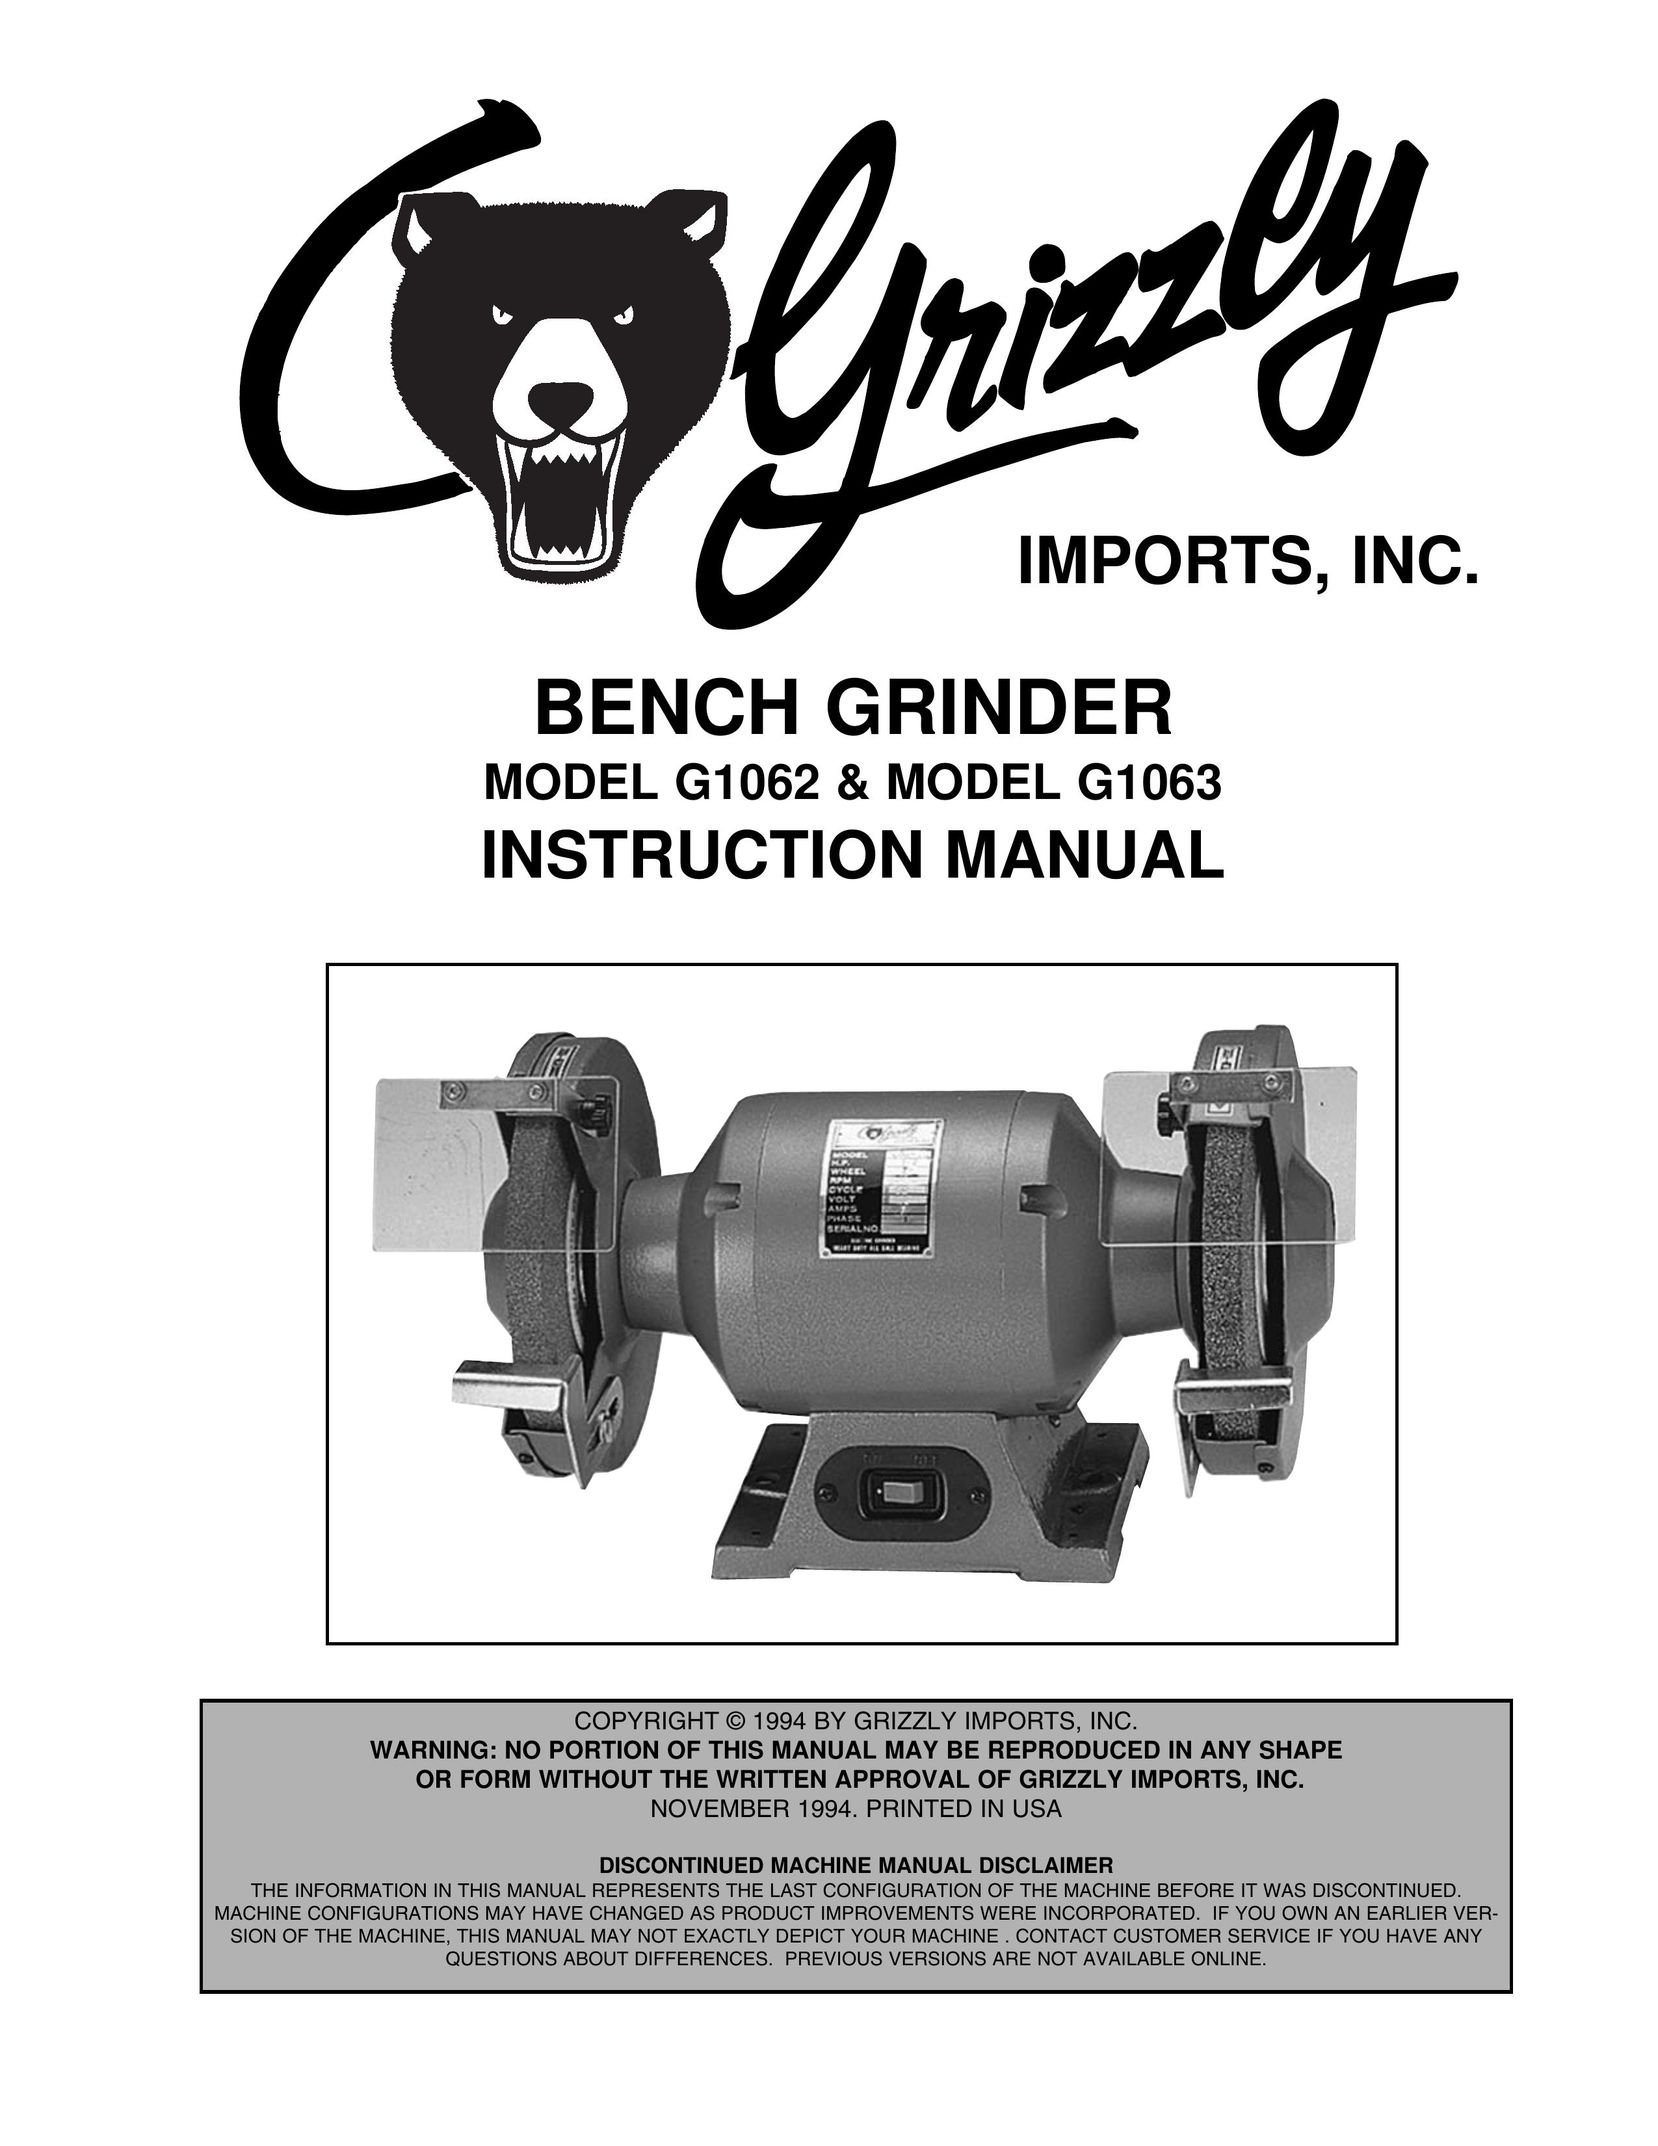 Grizzly G1063 Grinder User Manual